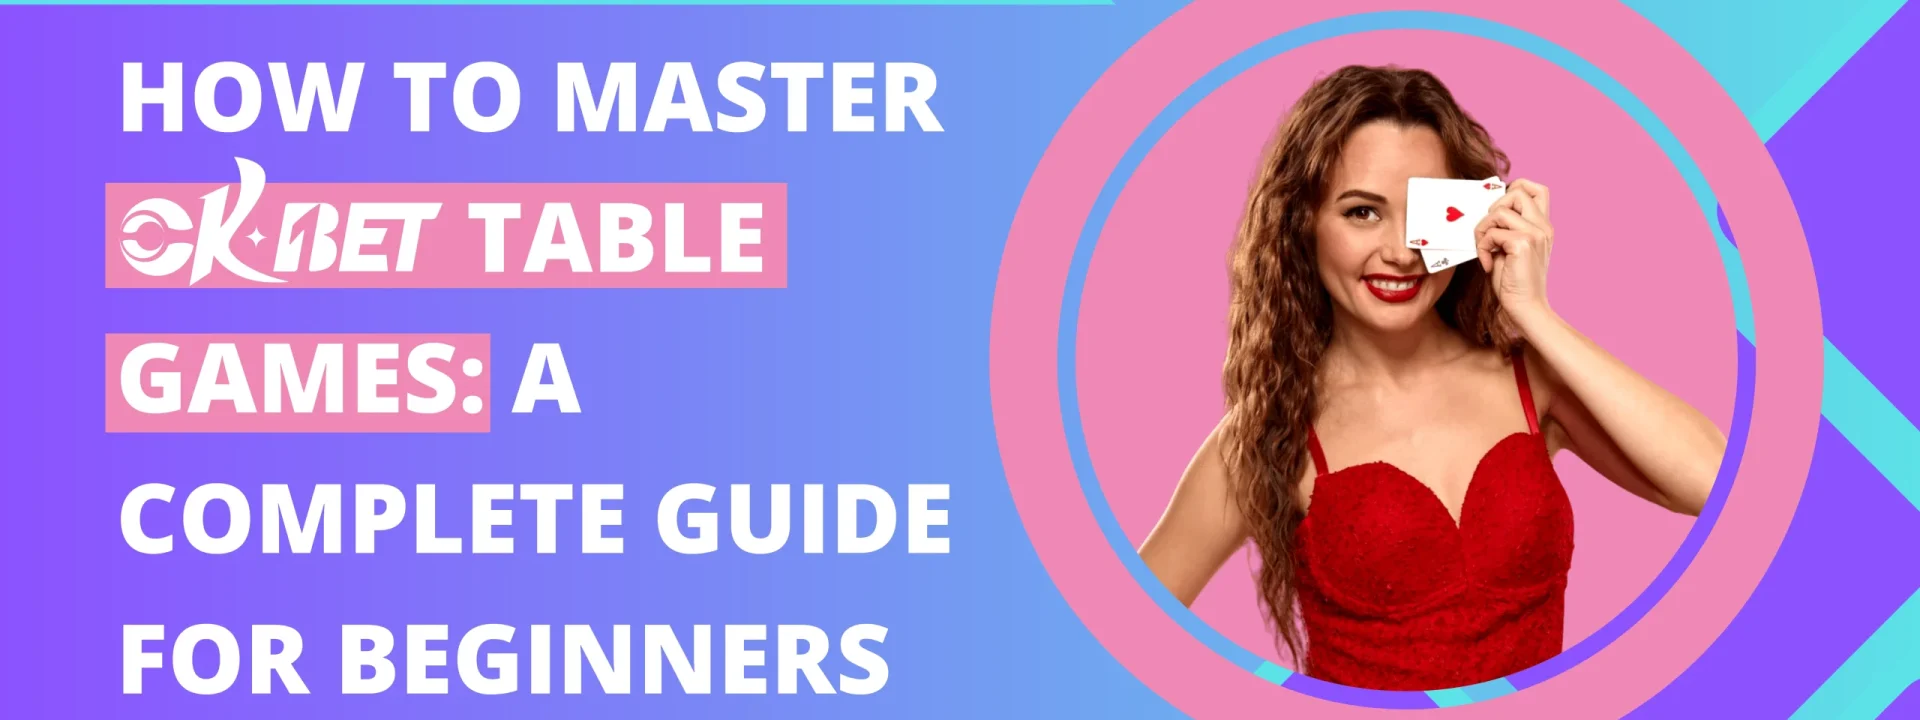 How to Master OKBet Table Games: A Complete Guide for Beginners